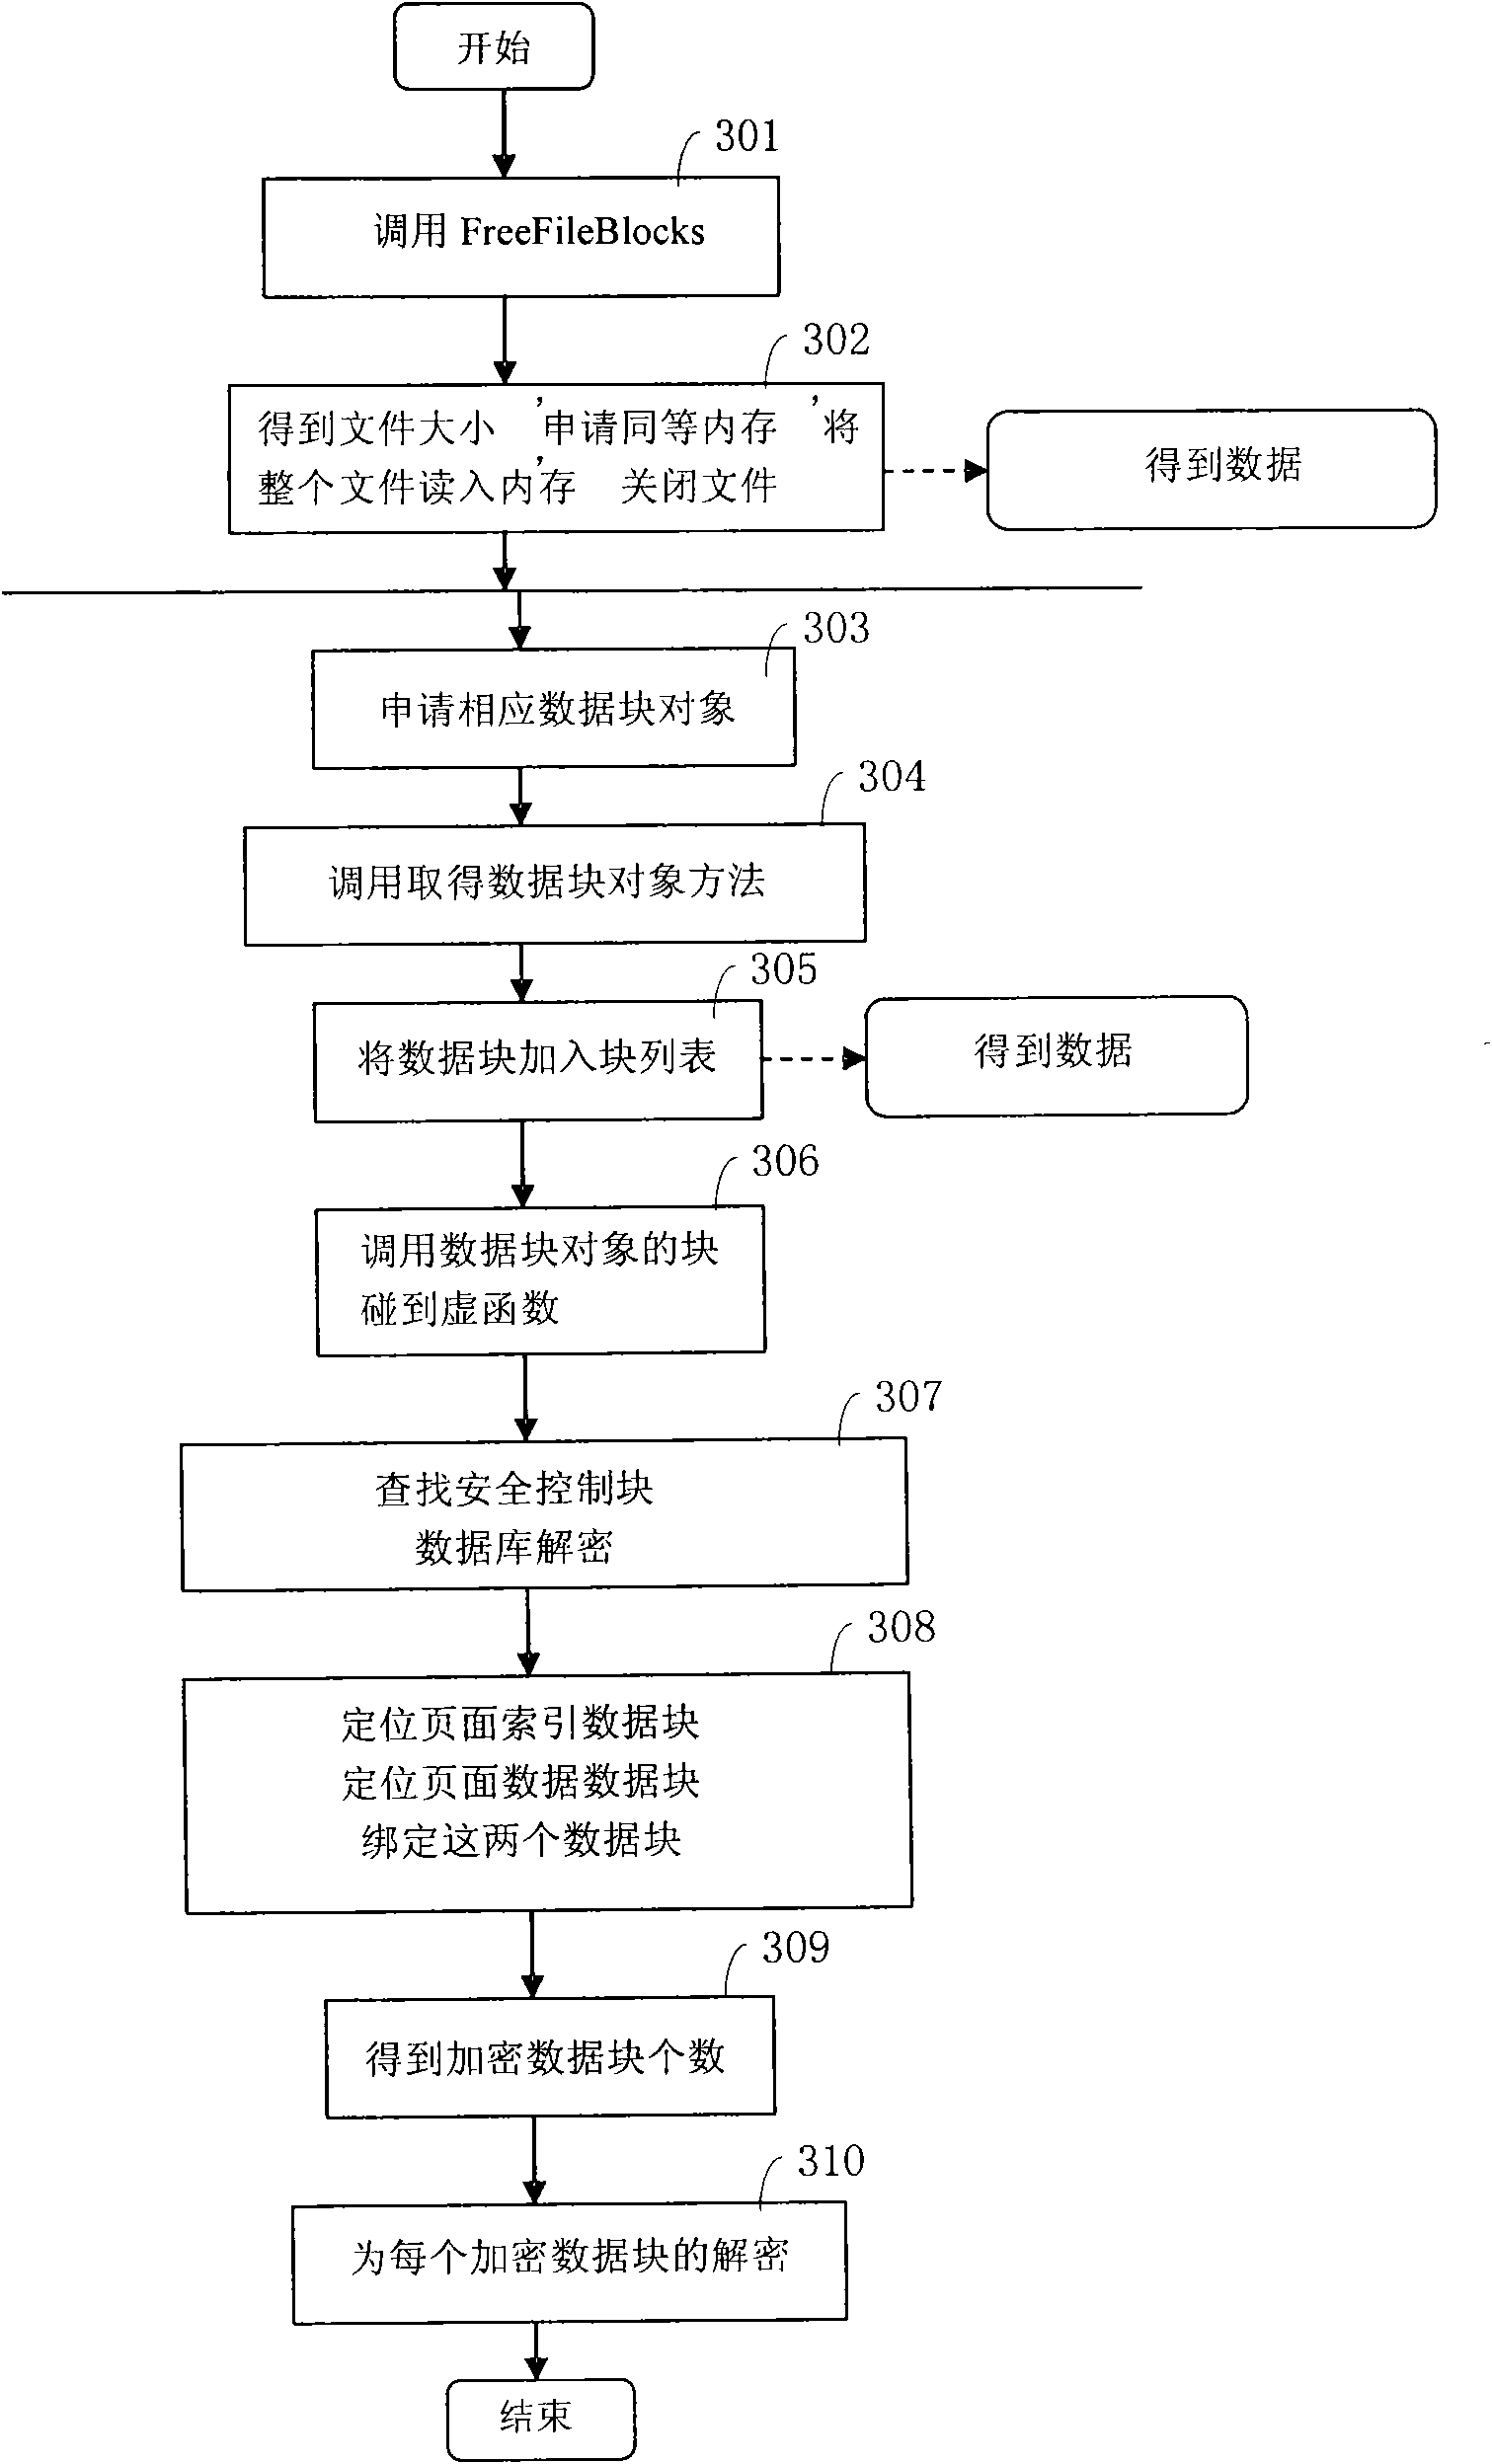 Method and system for acquiring and compressing paper document image-text information